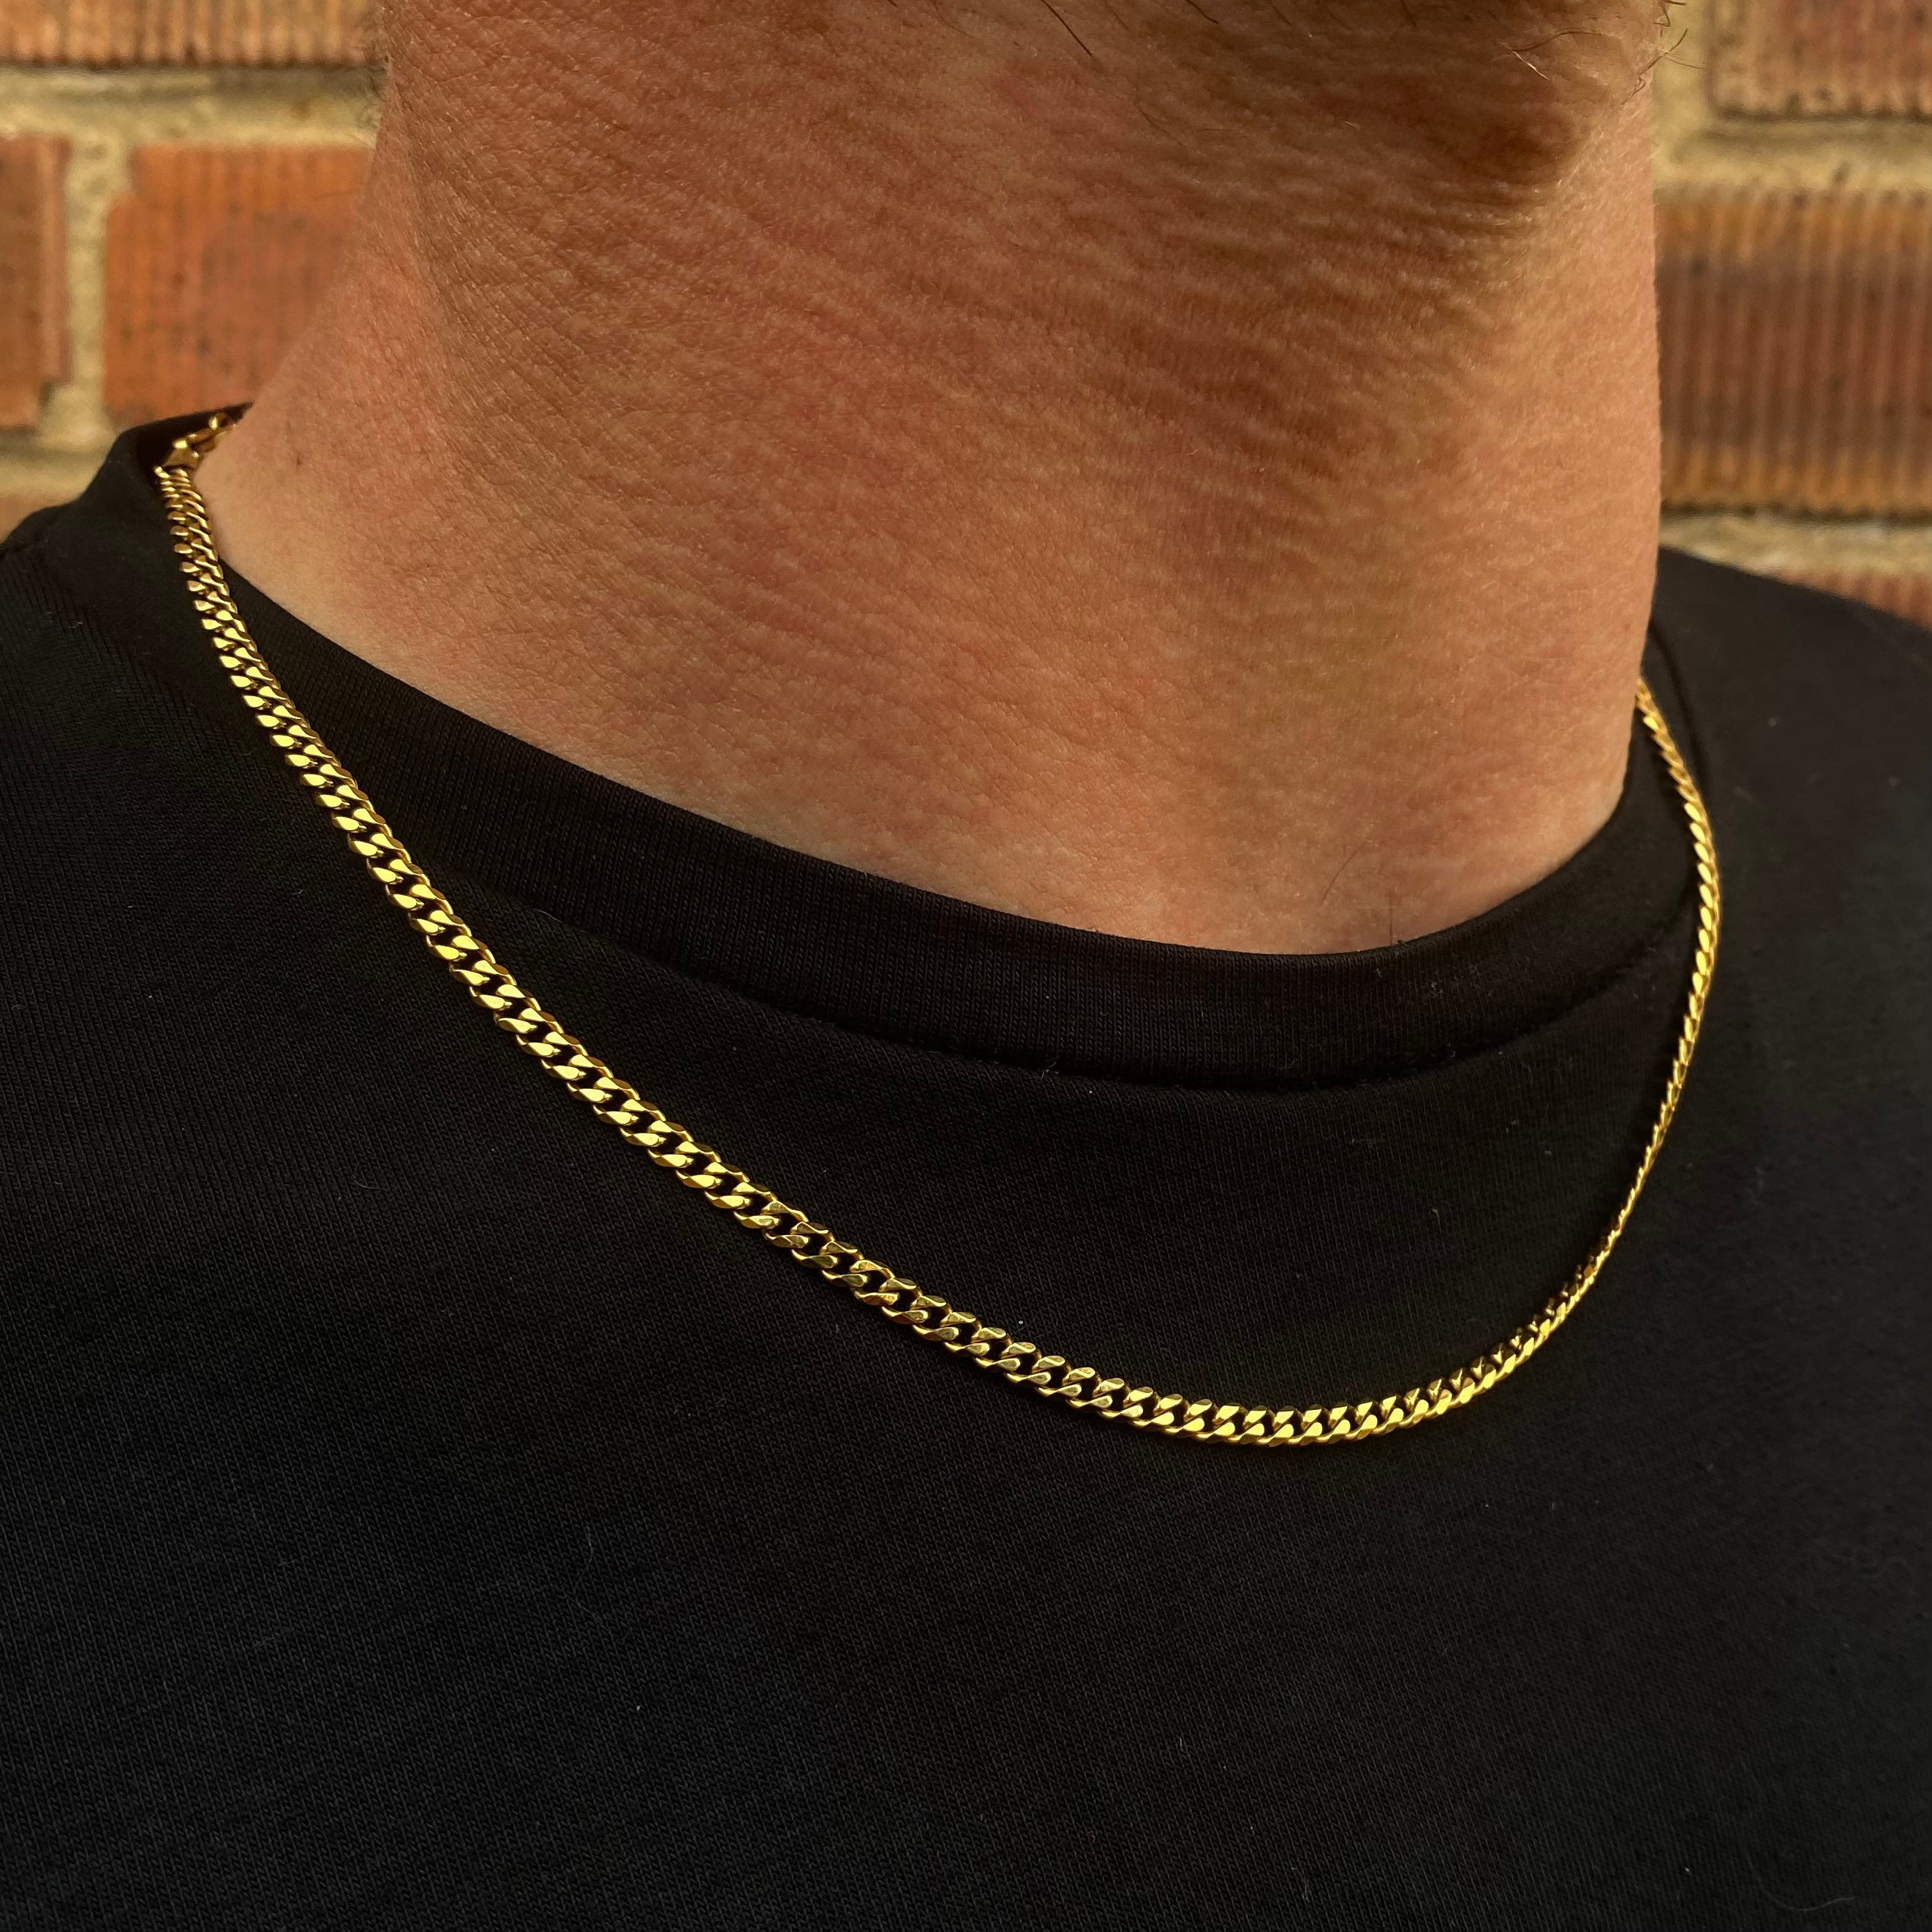 3mm Gold Chain Necklace, Short 16 20 Thin Choker Necklace Chain